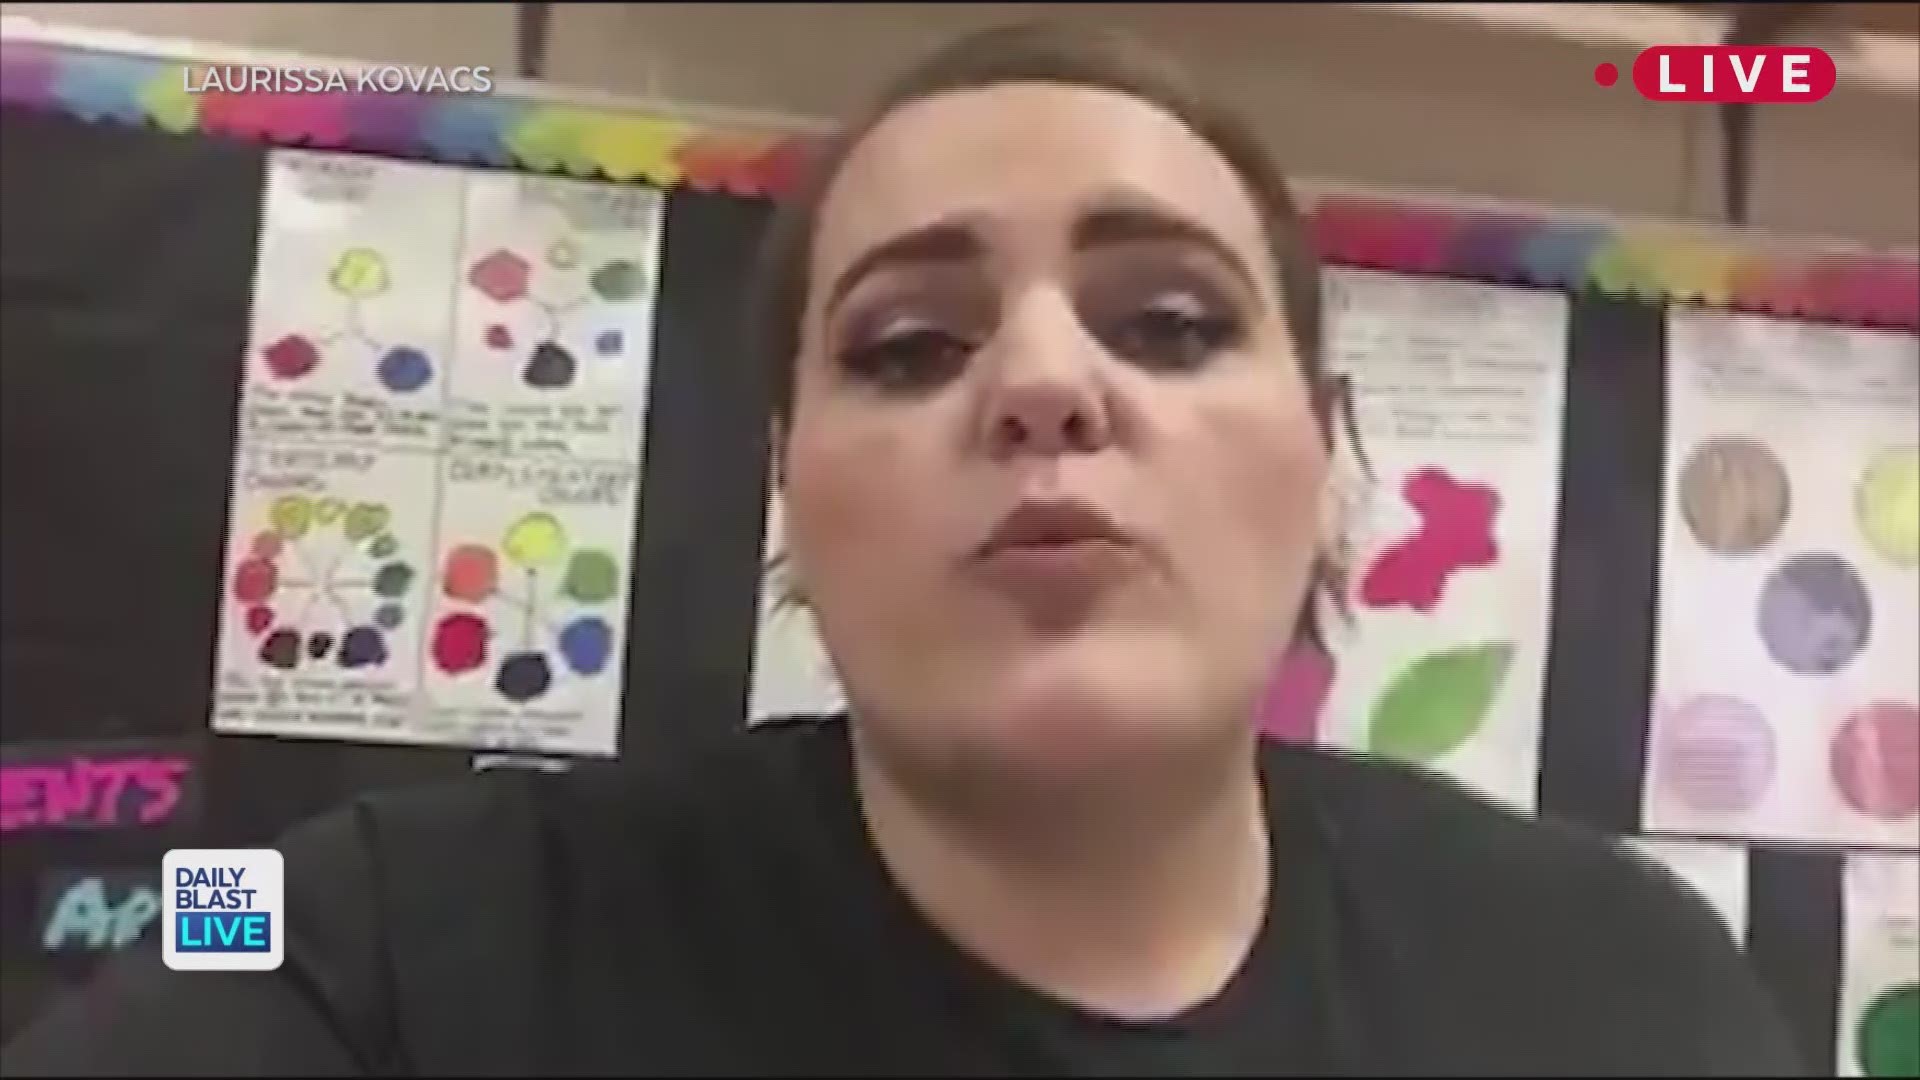 An Oklahoma art teacher's photo showing the bleak conditions of her classroom is going viral. Daily Blast LIVE talked with Laurissa Kovacs about teacher walk-outs, school funding, and the power of social media. This is an extra shot you won't want to miss